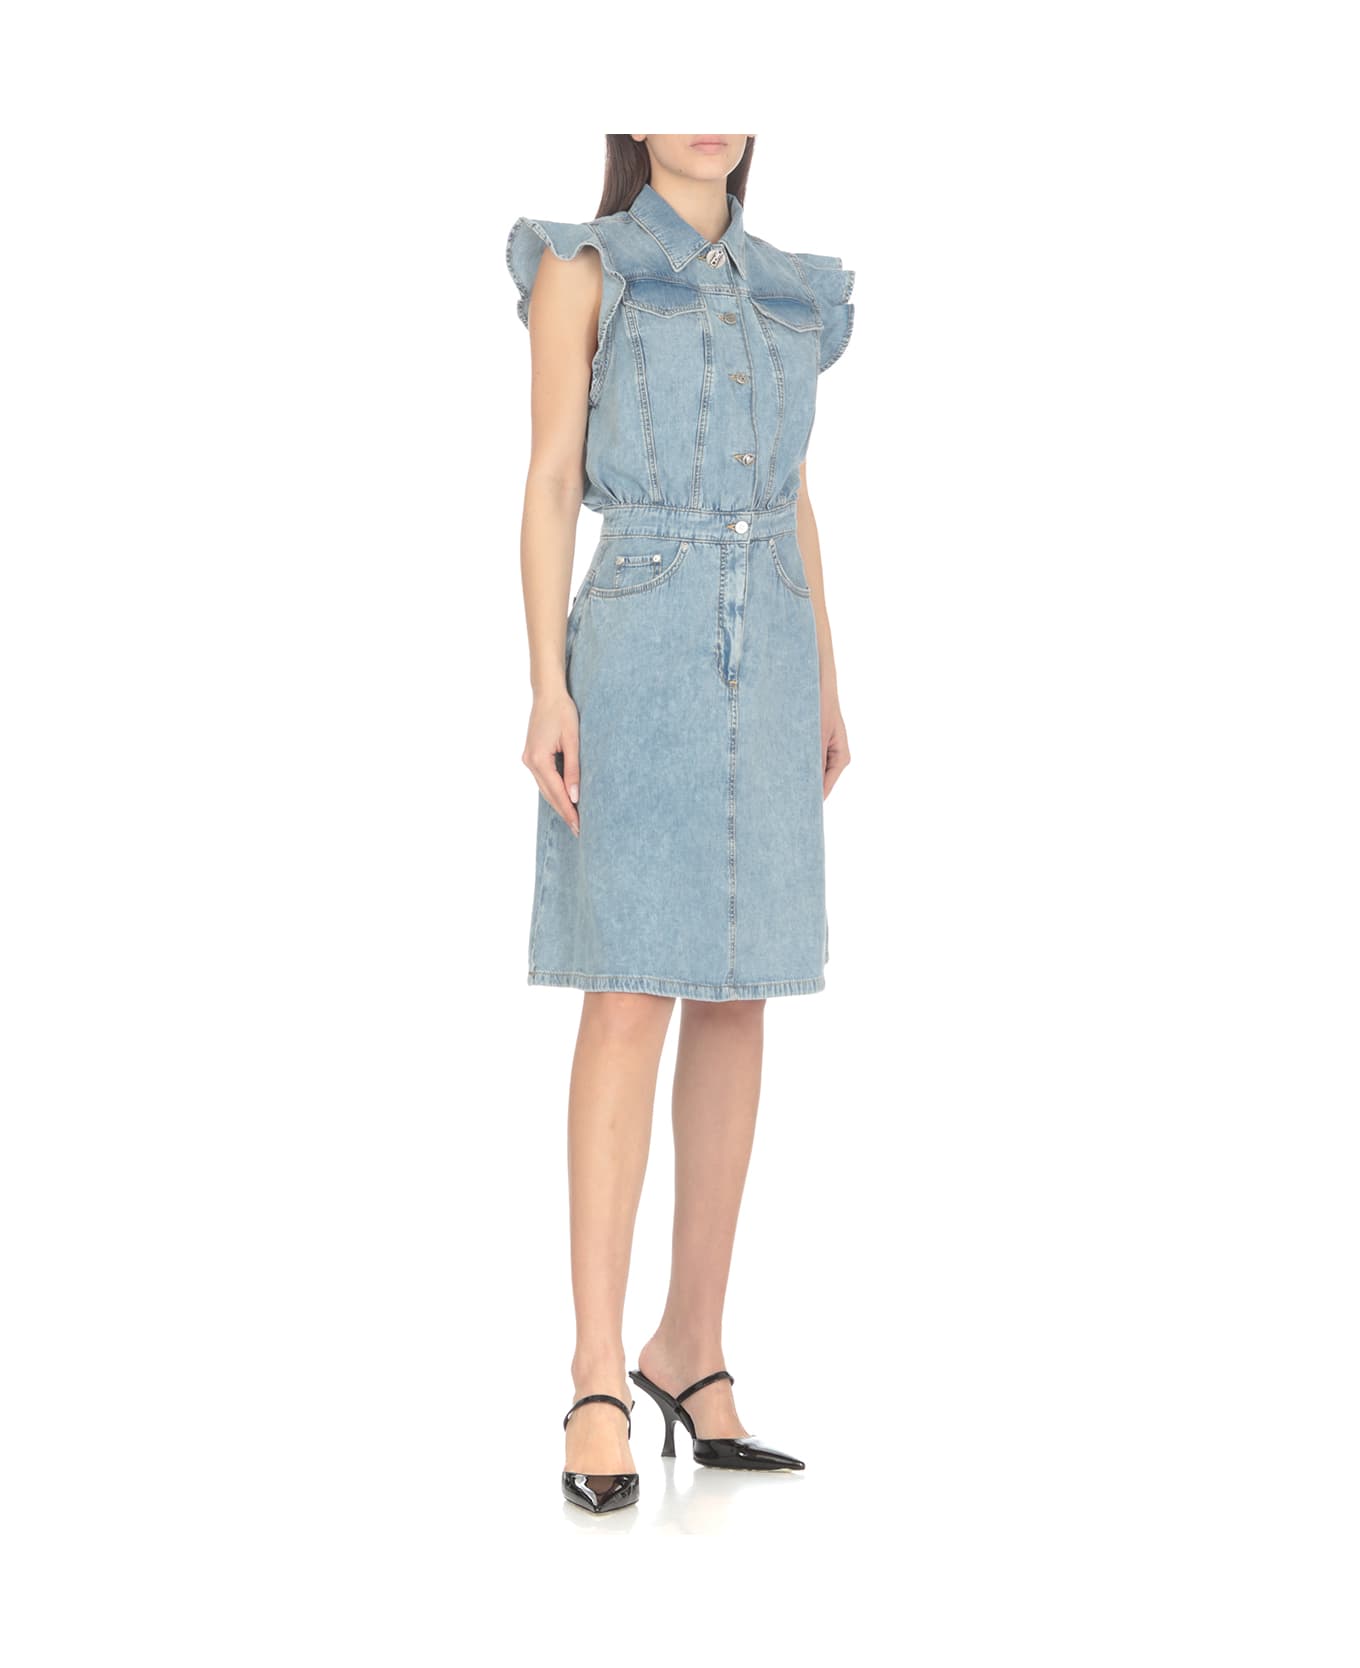 M05CH1N0 Jeans Cotton Dress - Stone Washed